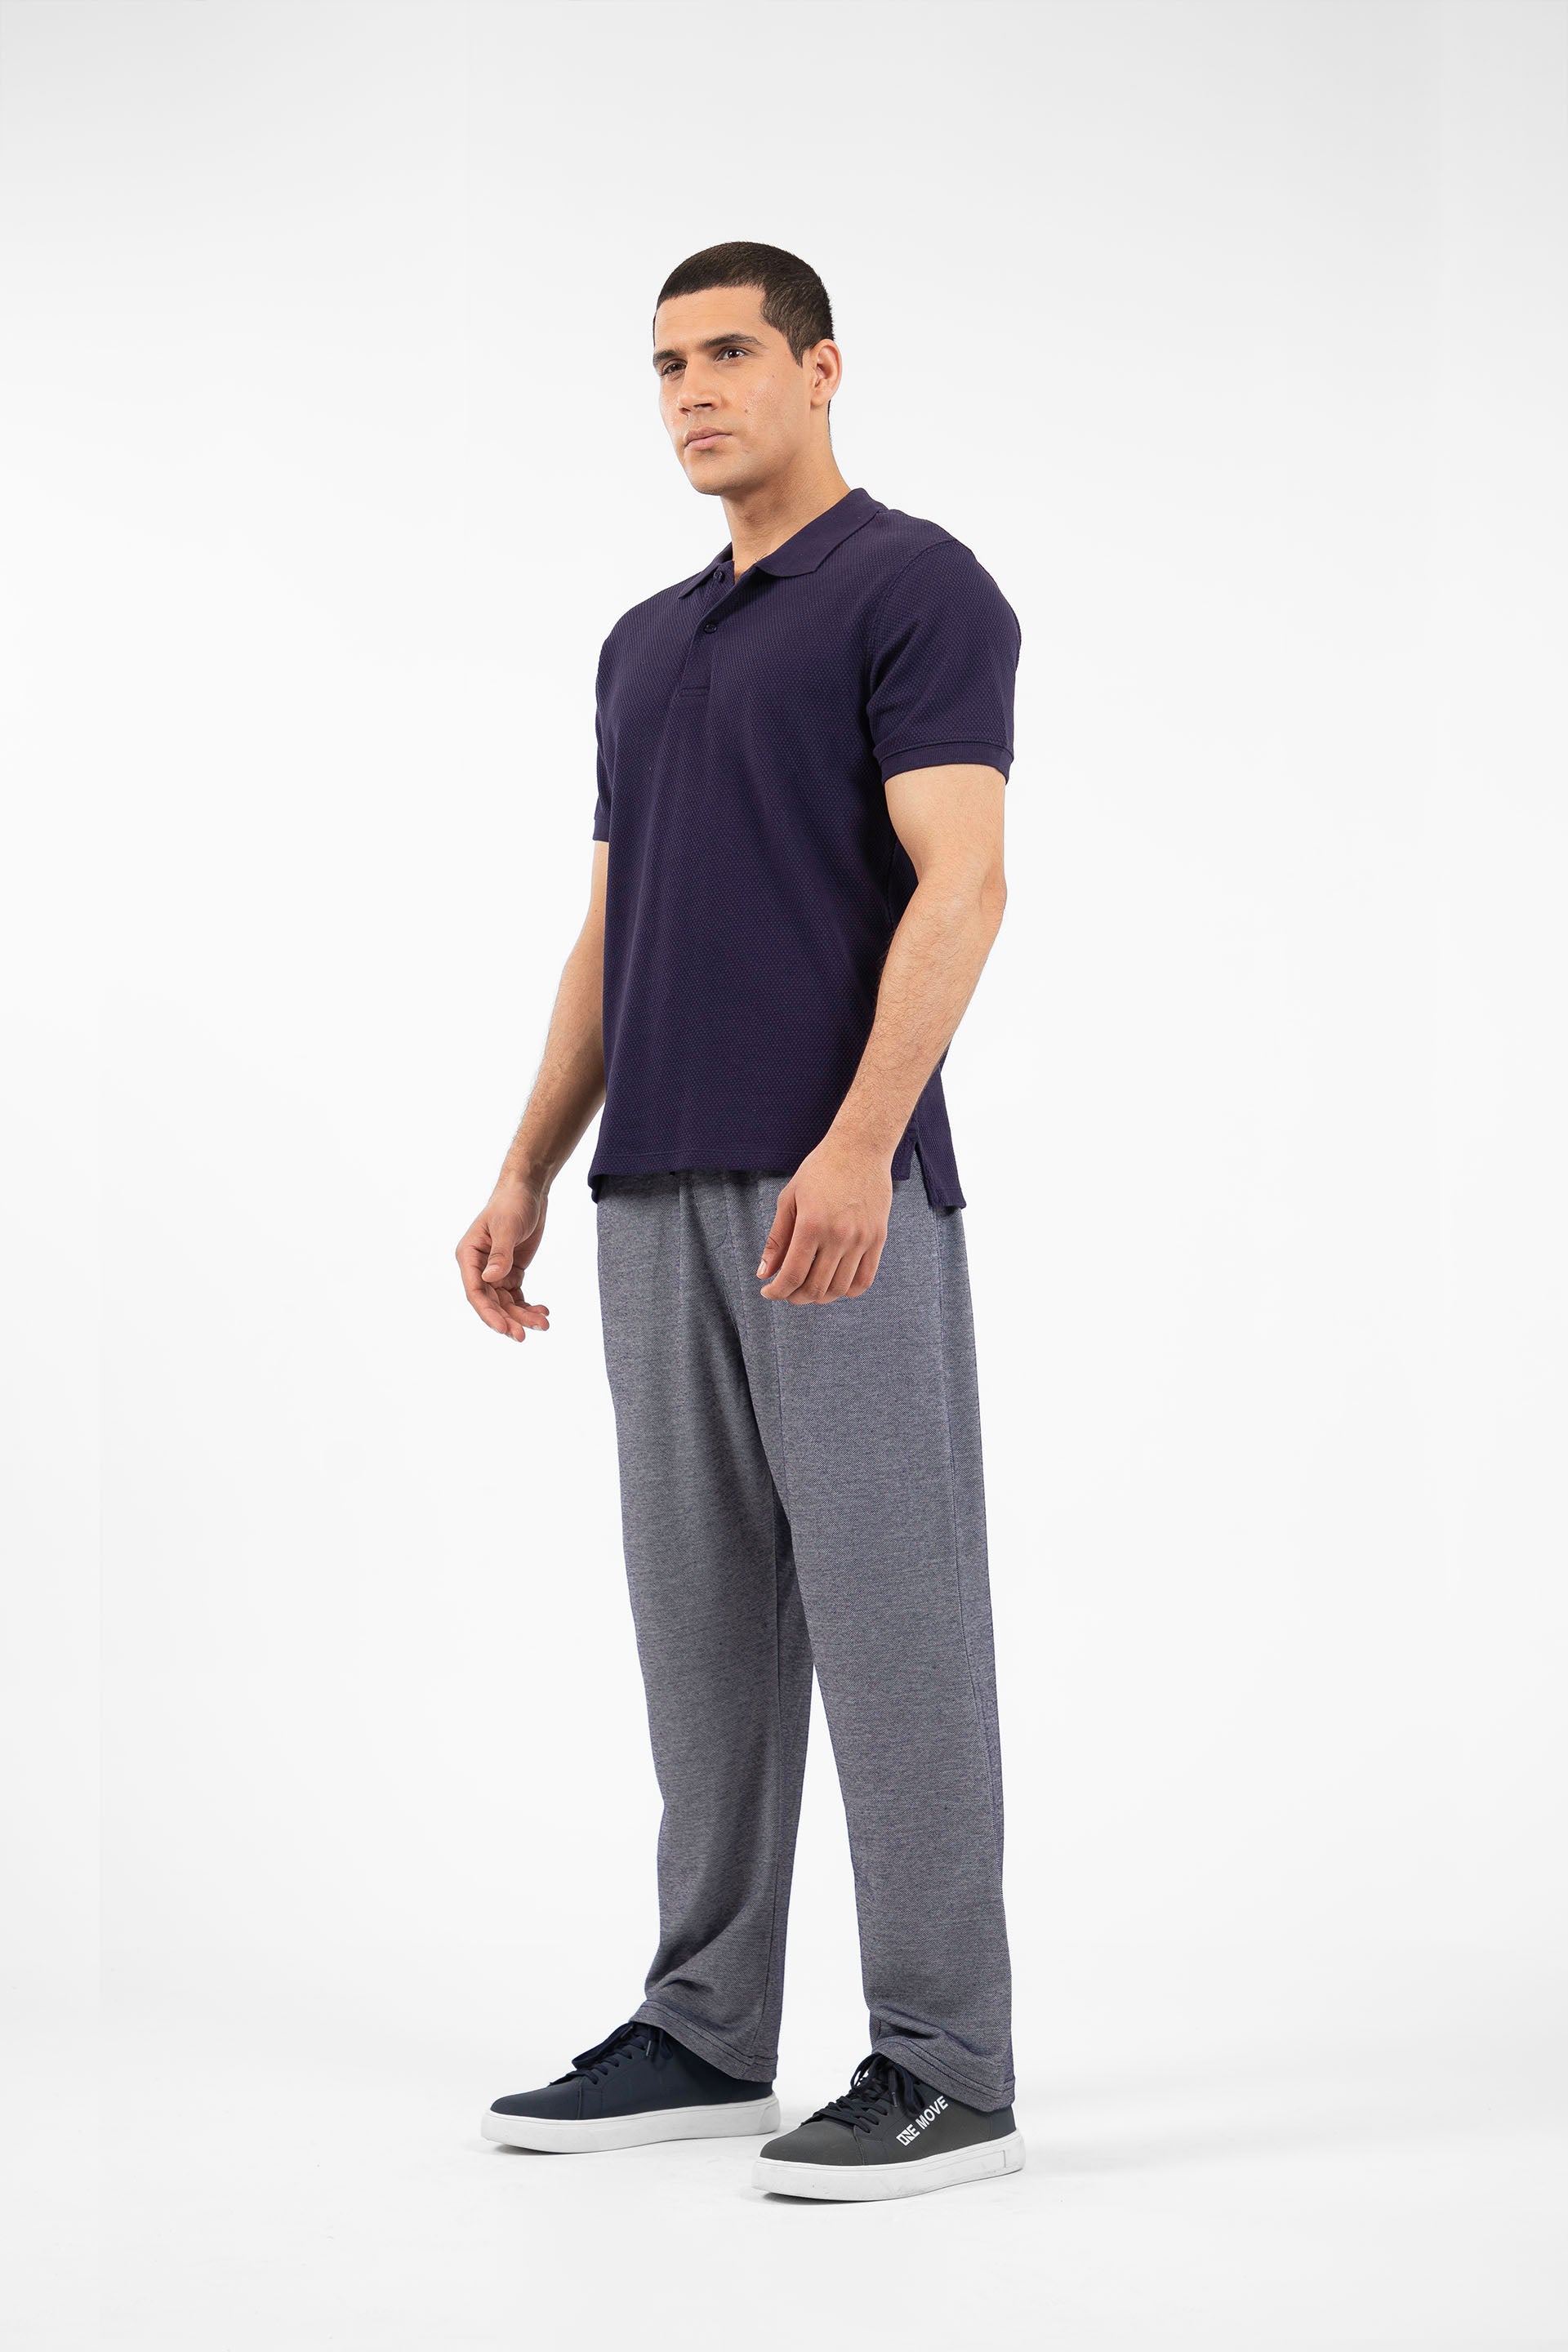 Aoelement Men's Long Trousers One-piece Thin Section Modal Line